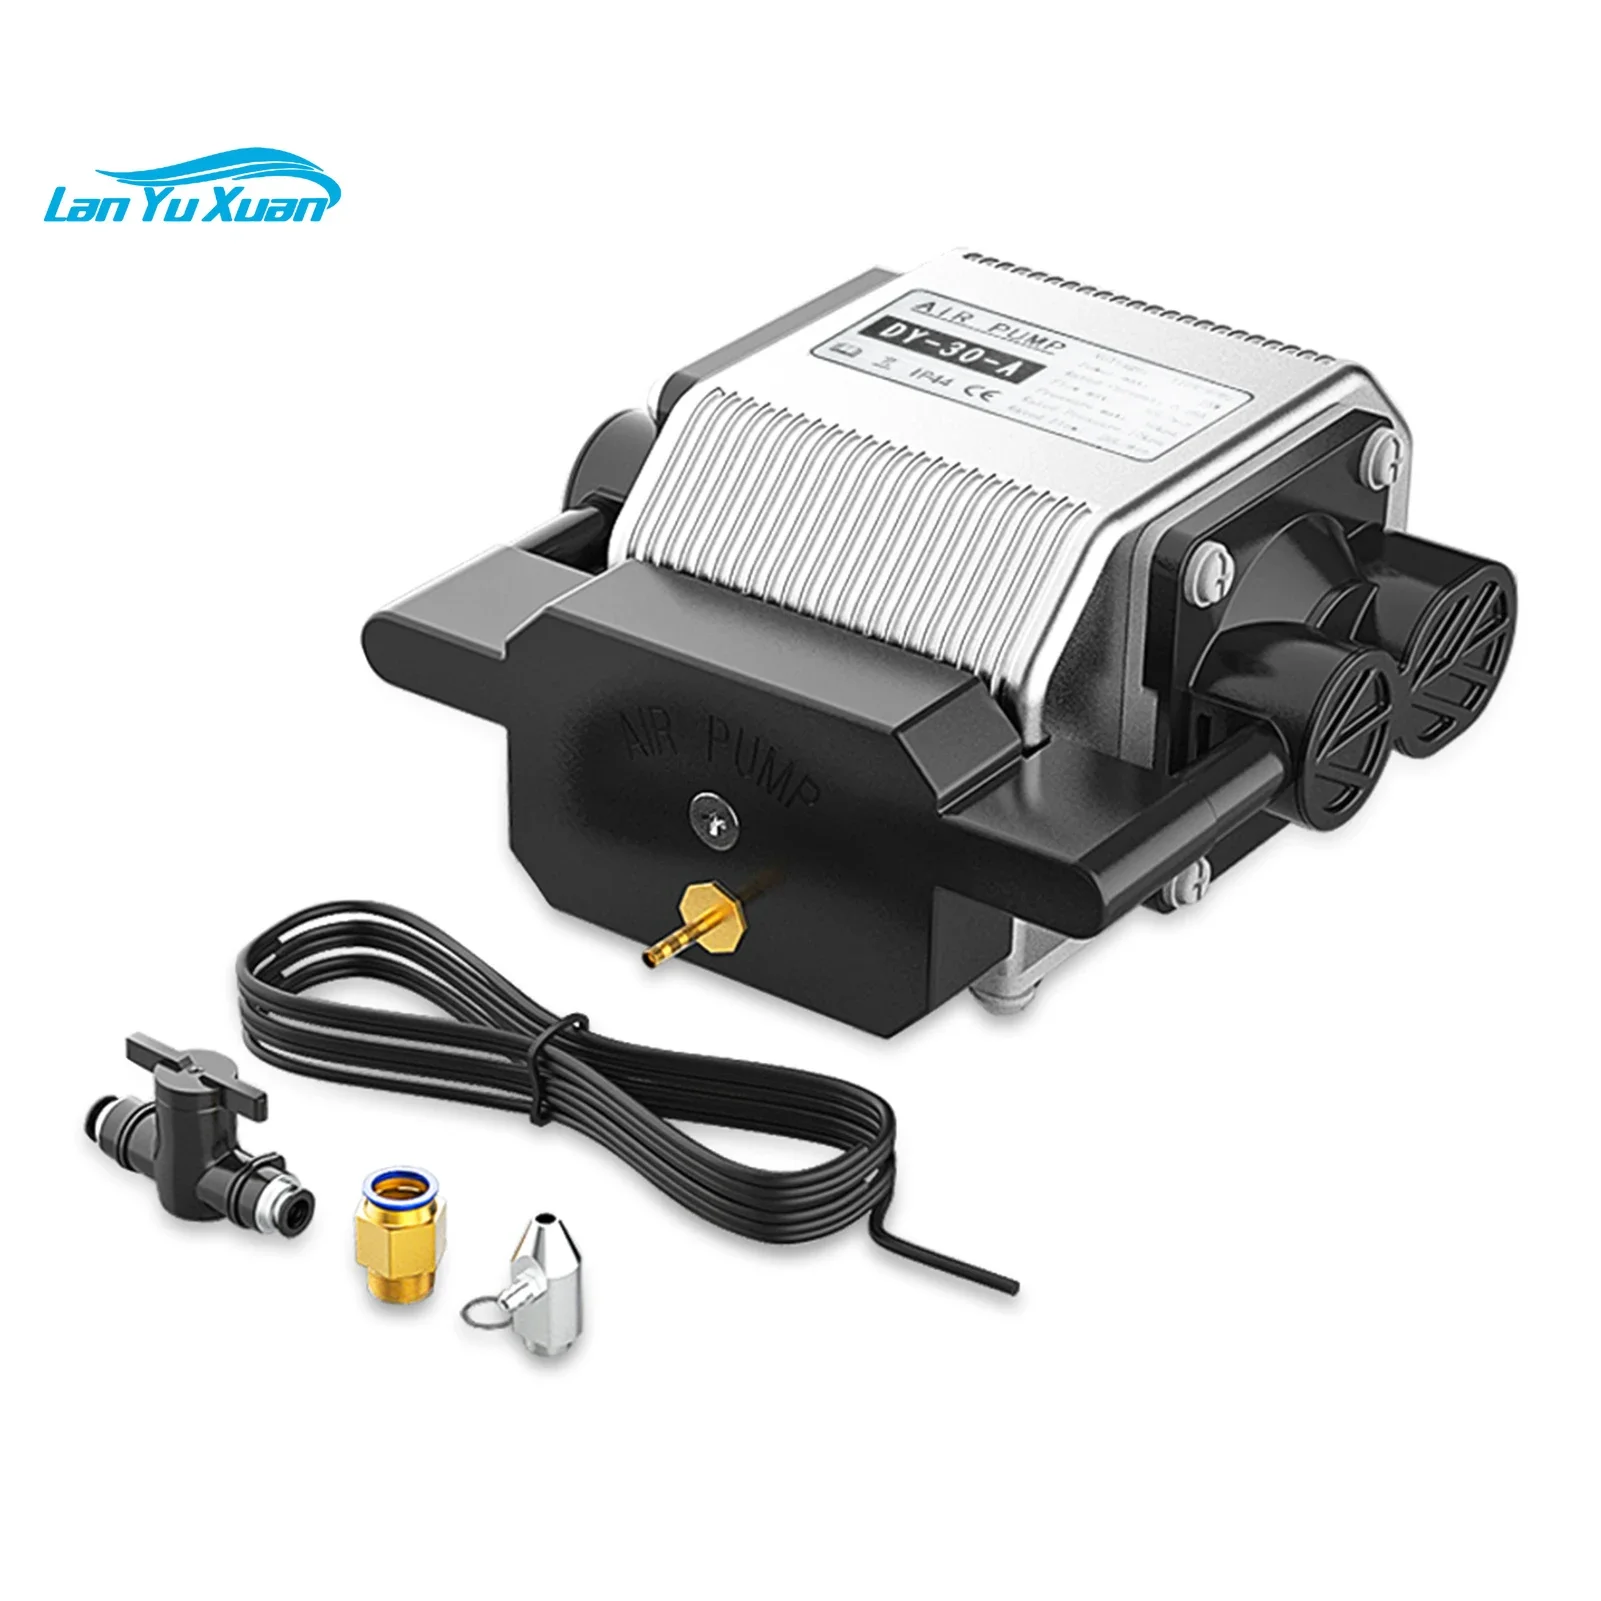 

LONGER RAY5 30L/Min 20W/10W Air Assist Pump Compressor For CNC Engraving Machine Adjustable Speed Low Noise Upgraded